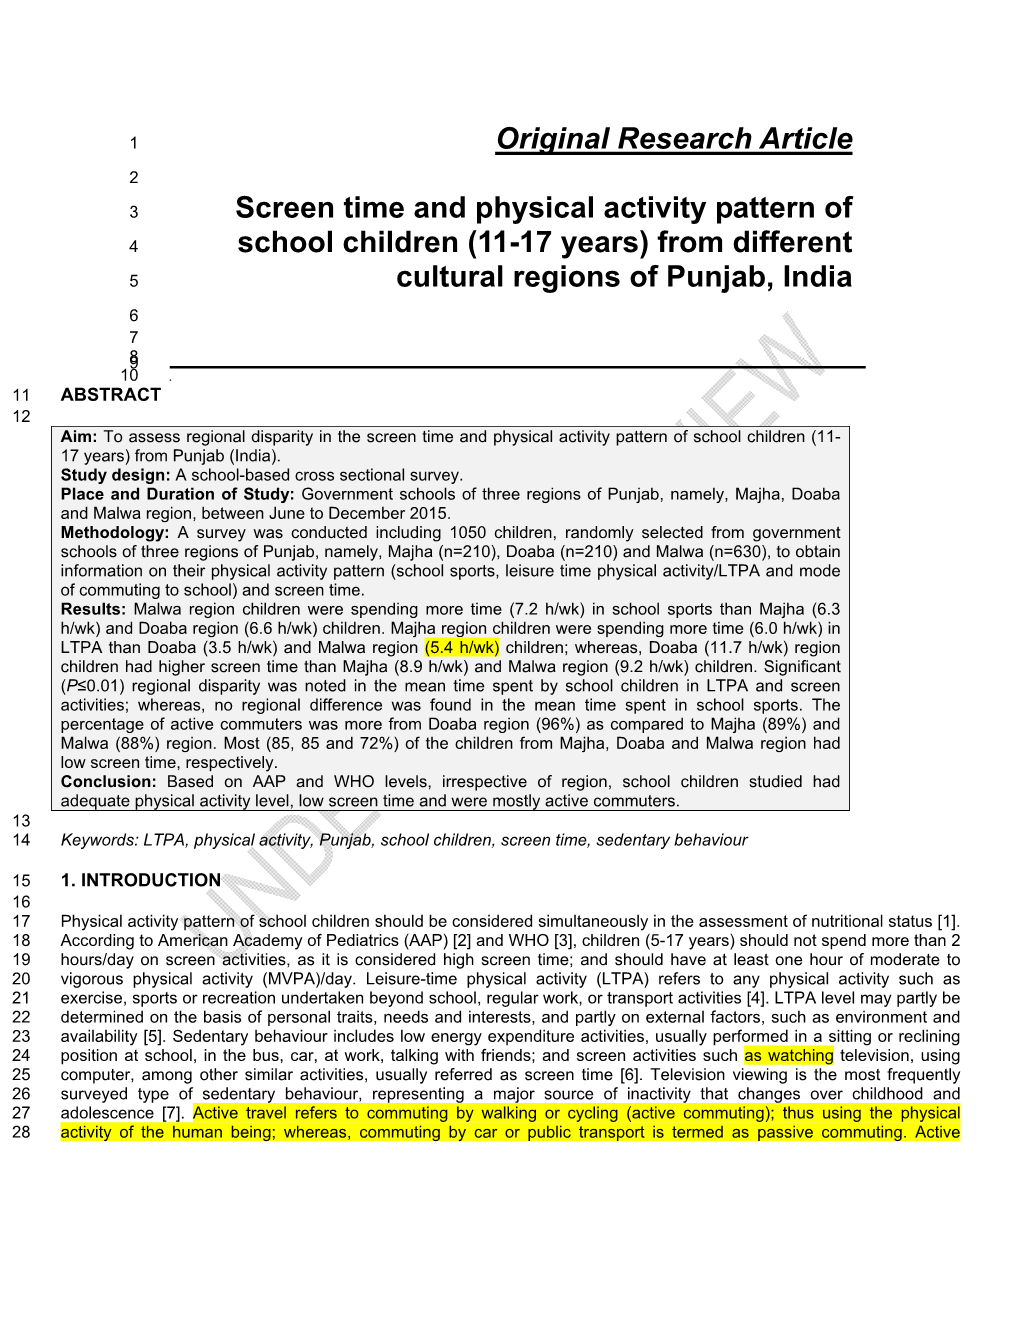 Original Research Article Screen Time and Physical Activity Pattern of School Children (11-17 Years) from Different Cultural